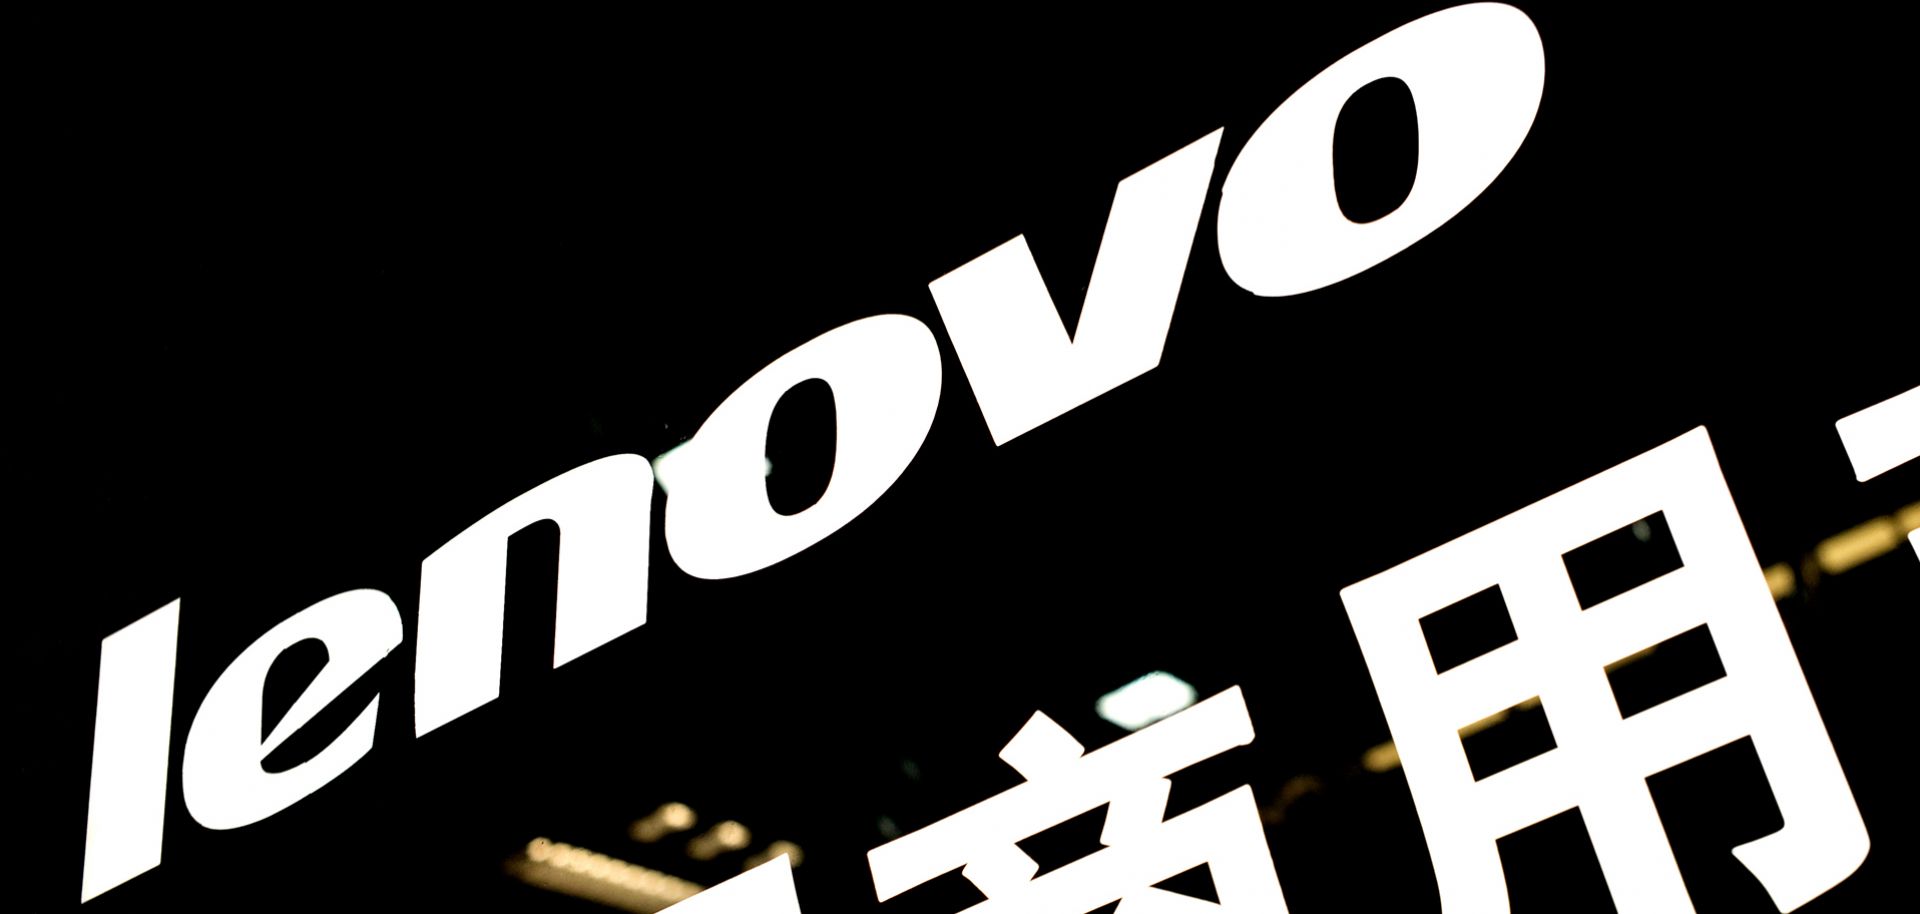 The Lenovo logo is displayed at a computer center in Shanghai.